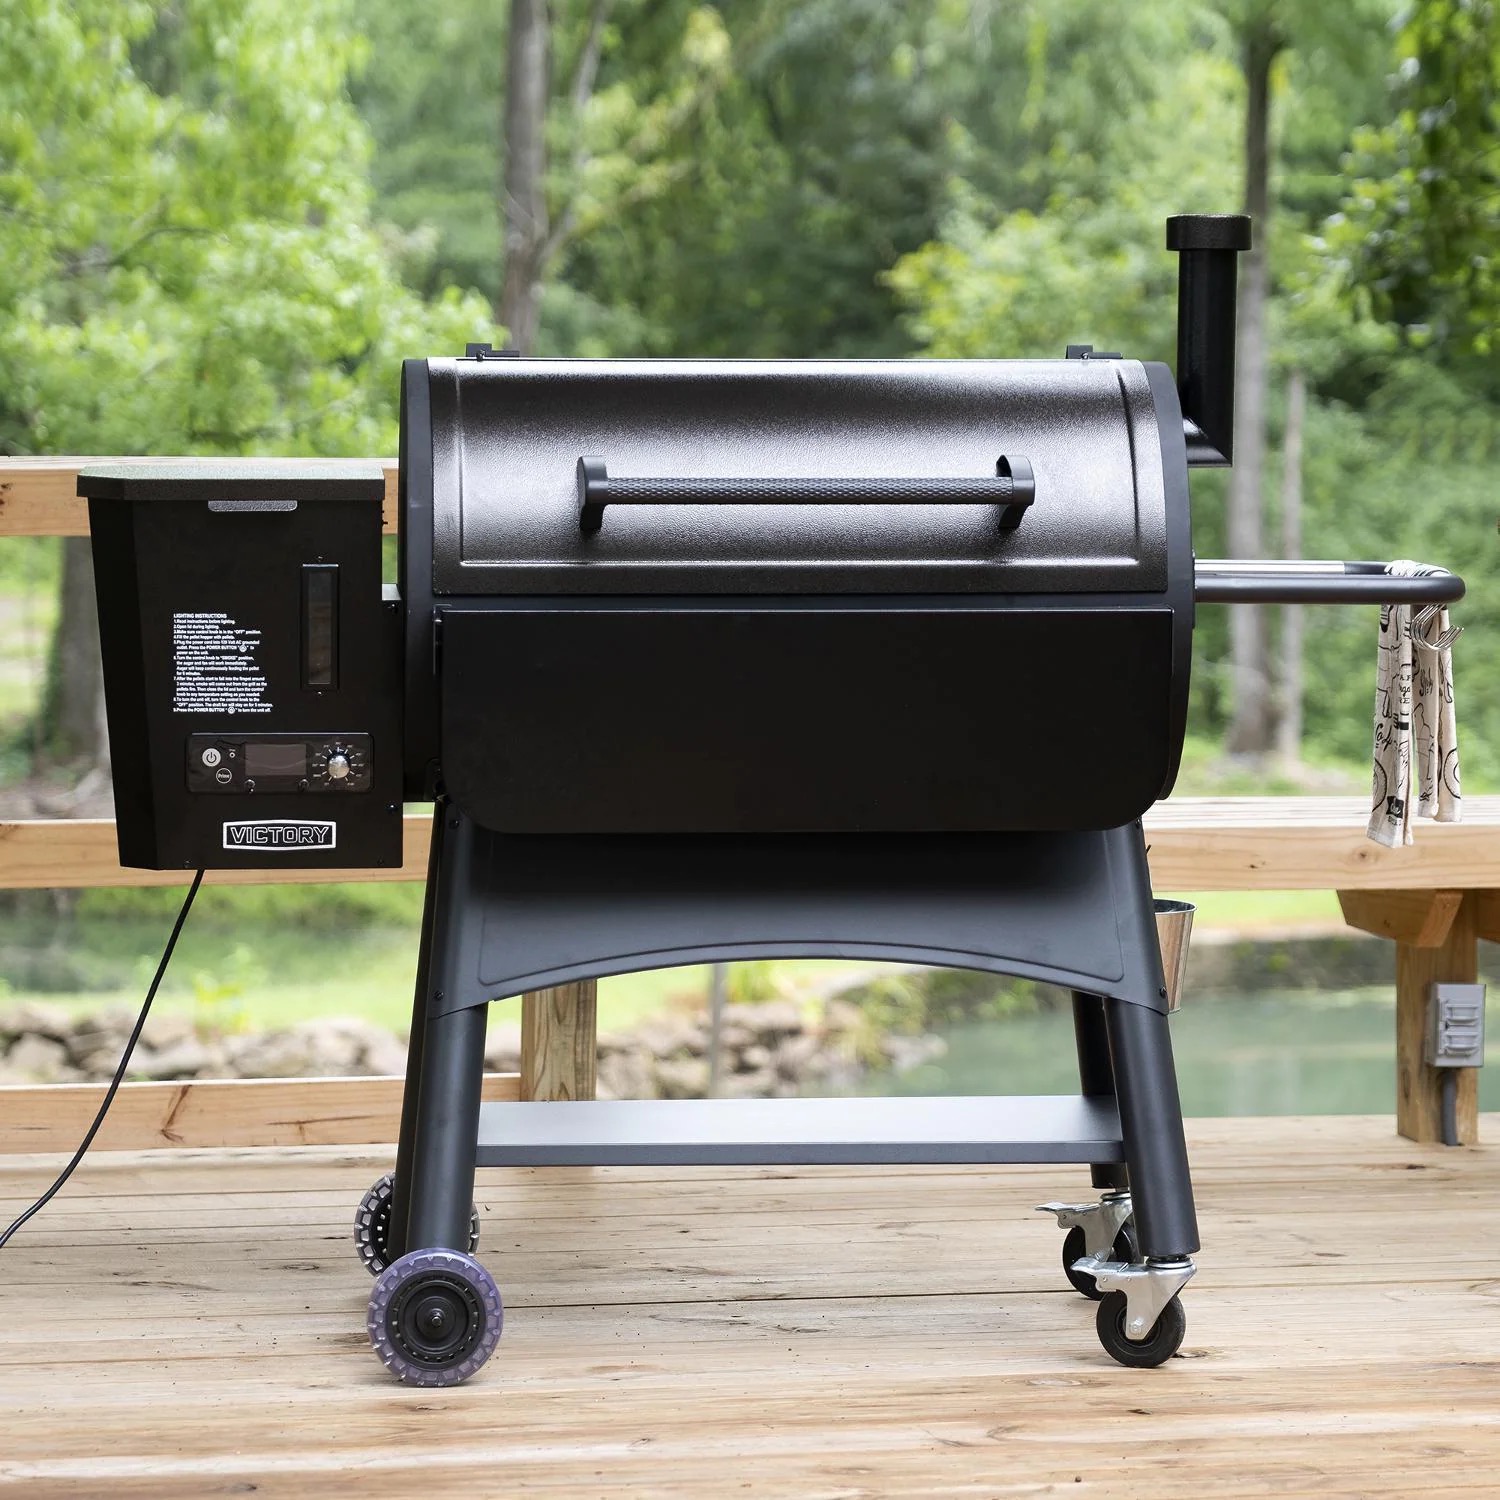 Save 20% on a top-rated indoor smokeless grill (Update: Expired) - CNET